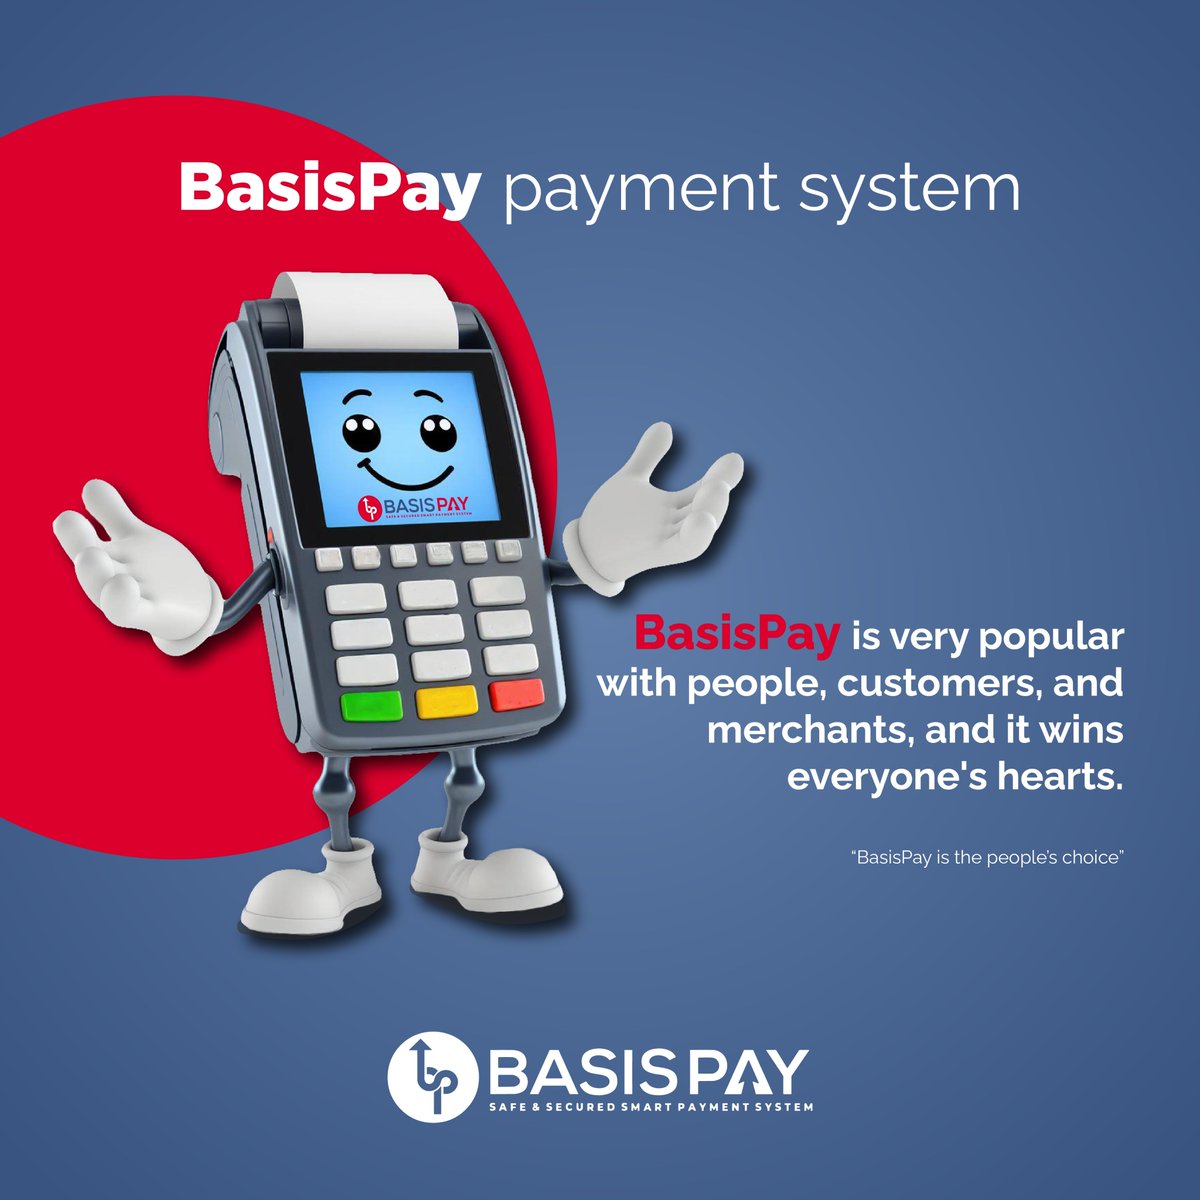 BasisPay is the people's choice 

#basispay #upi #pointofsale #contactlesspayments #buy #bank #finance #news #online #mobile #shopping #pos #qrpay #qr #digitalpayment #payments #paymentgateway #india #digitalmoney #debitcard #creditcard #digital #mobilepayment #world #ai